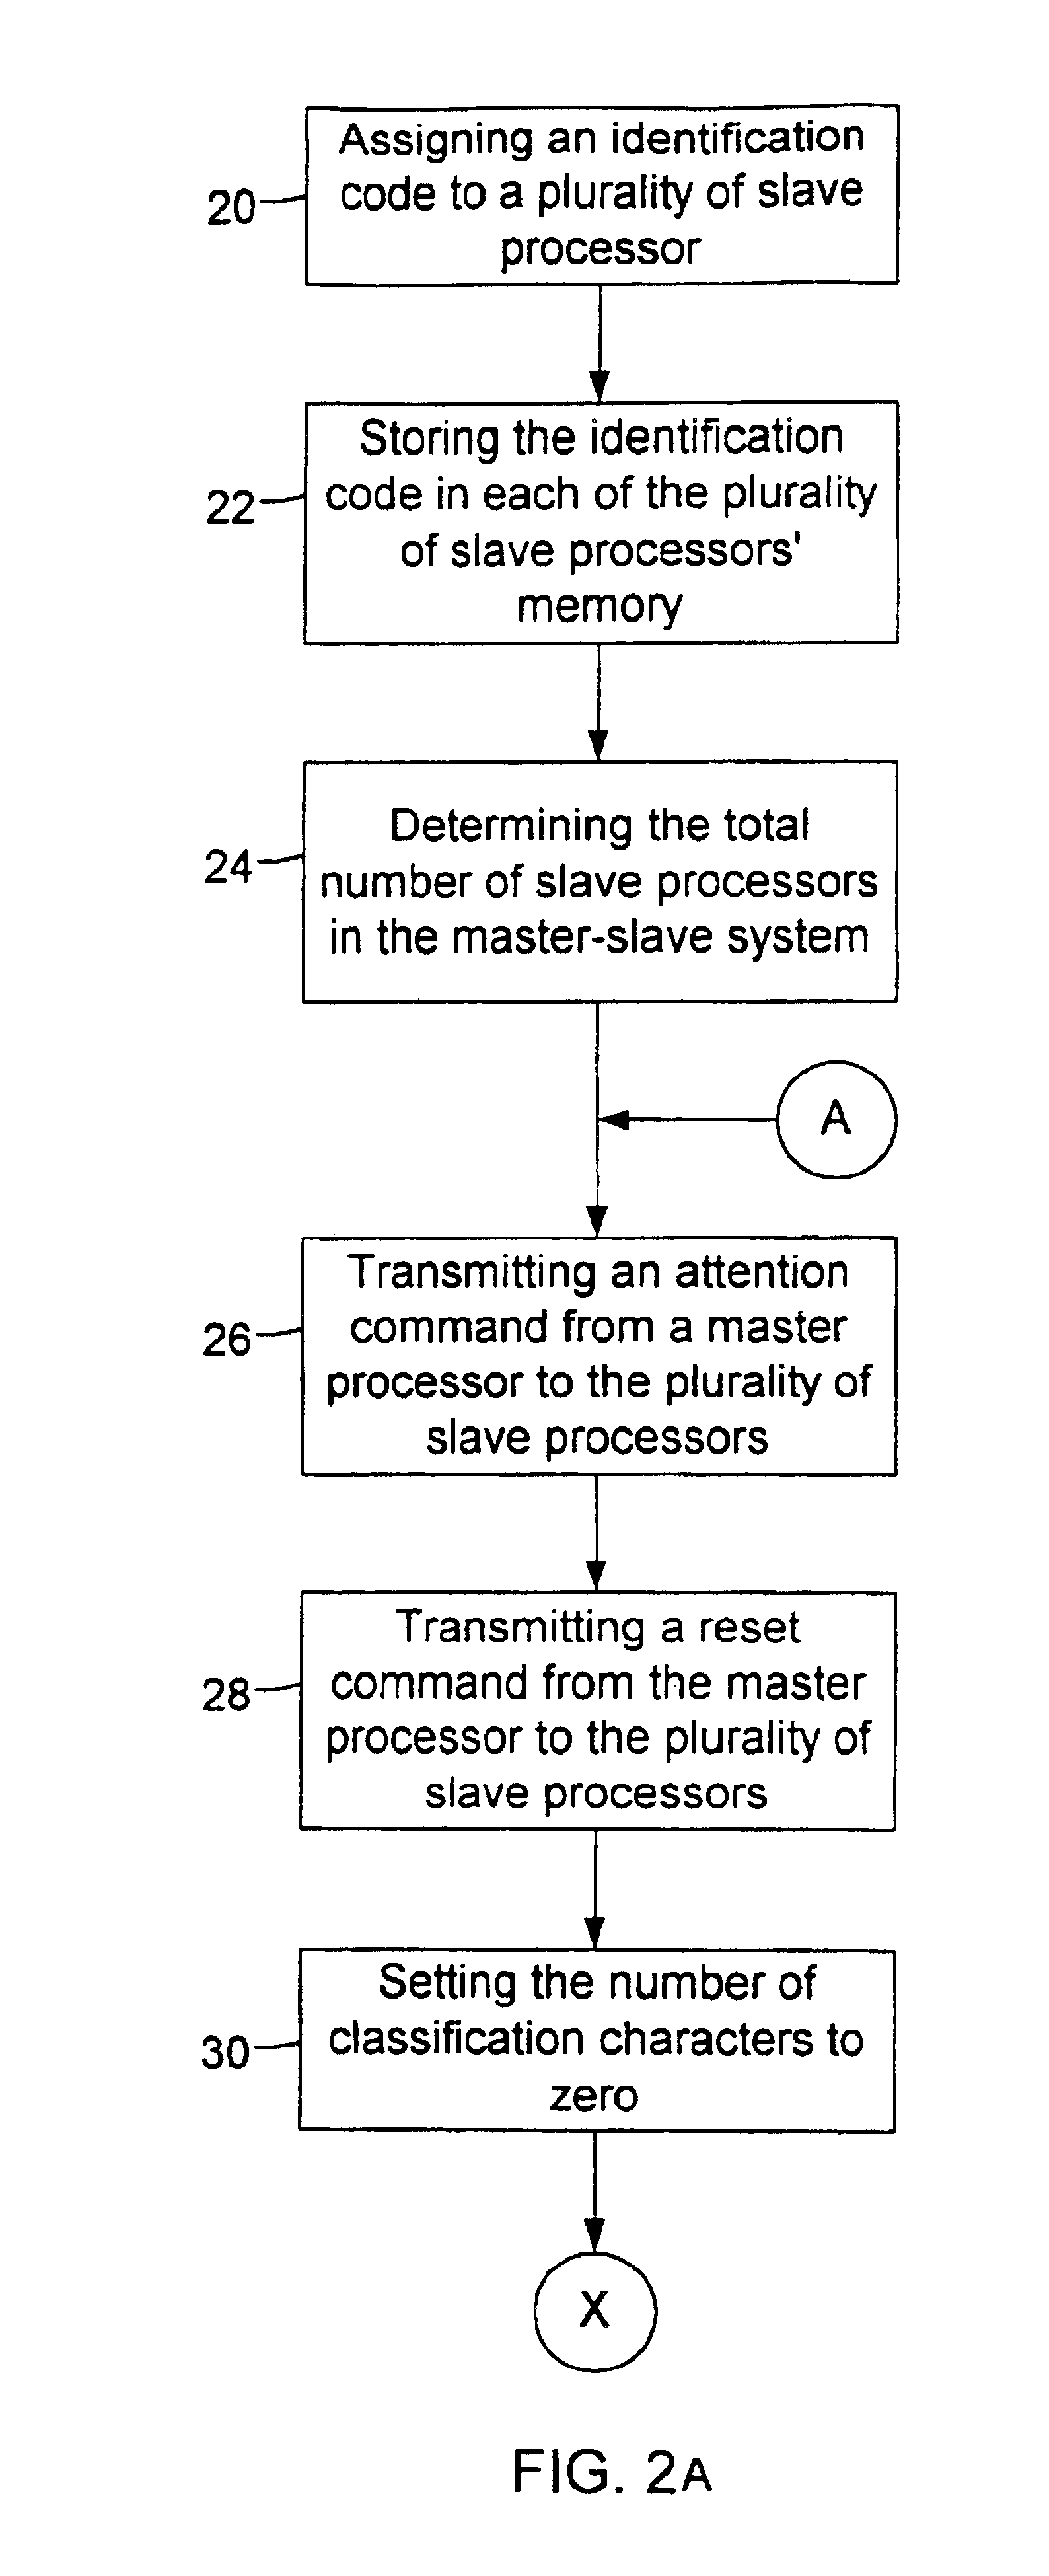 Method for identifying and communicating with a plurality of slaves in a master-slave system